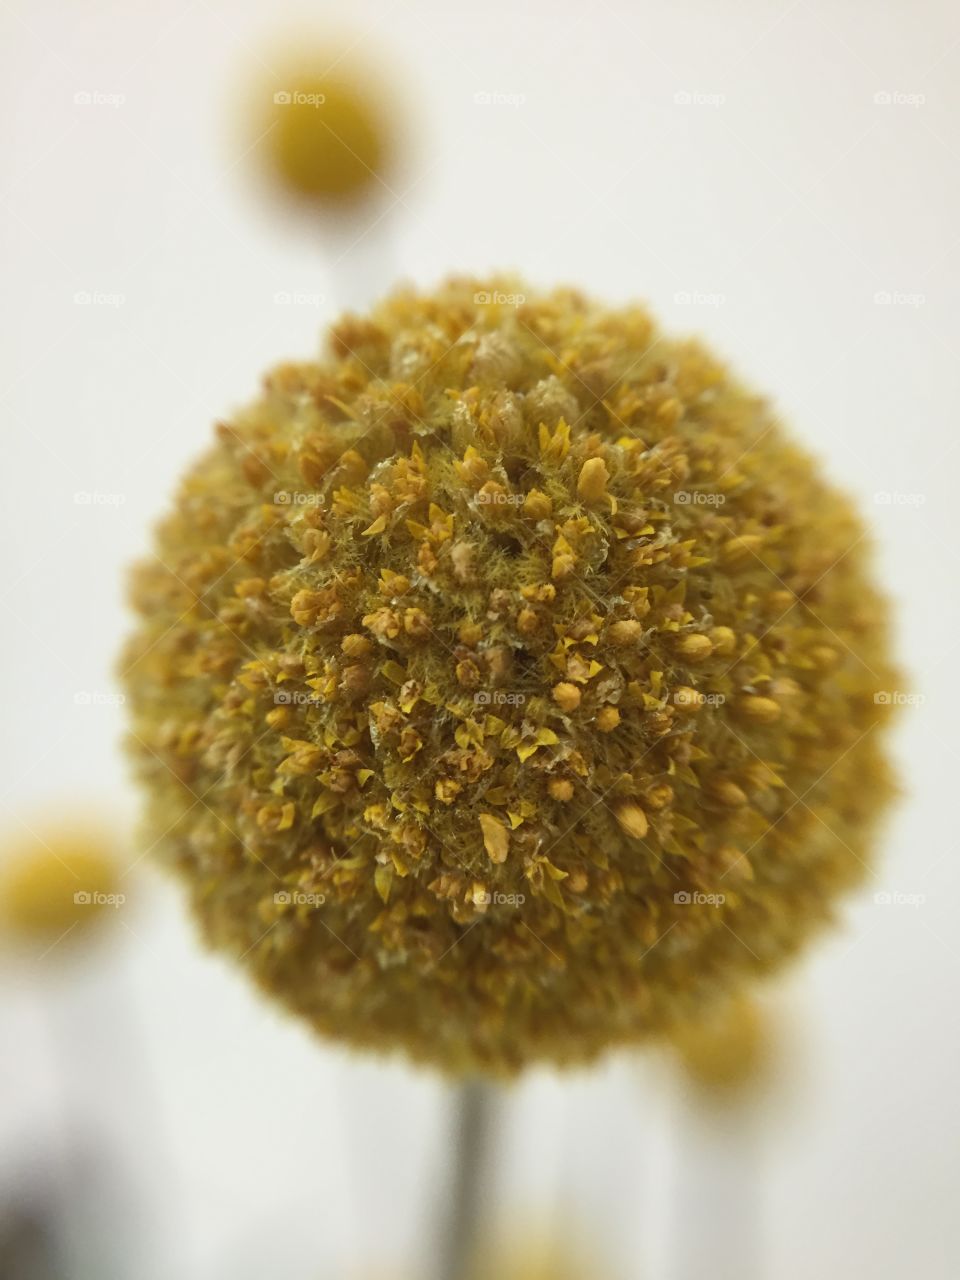 This dried ball is s variety of daisy, that grows as a cluster of tiny flowers.